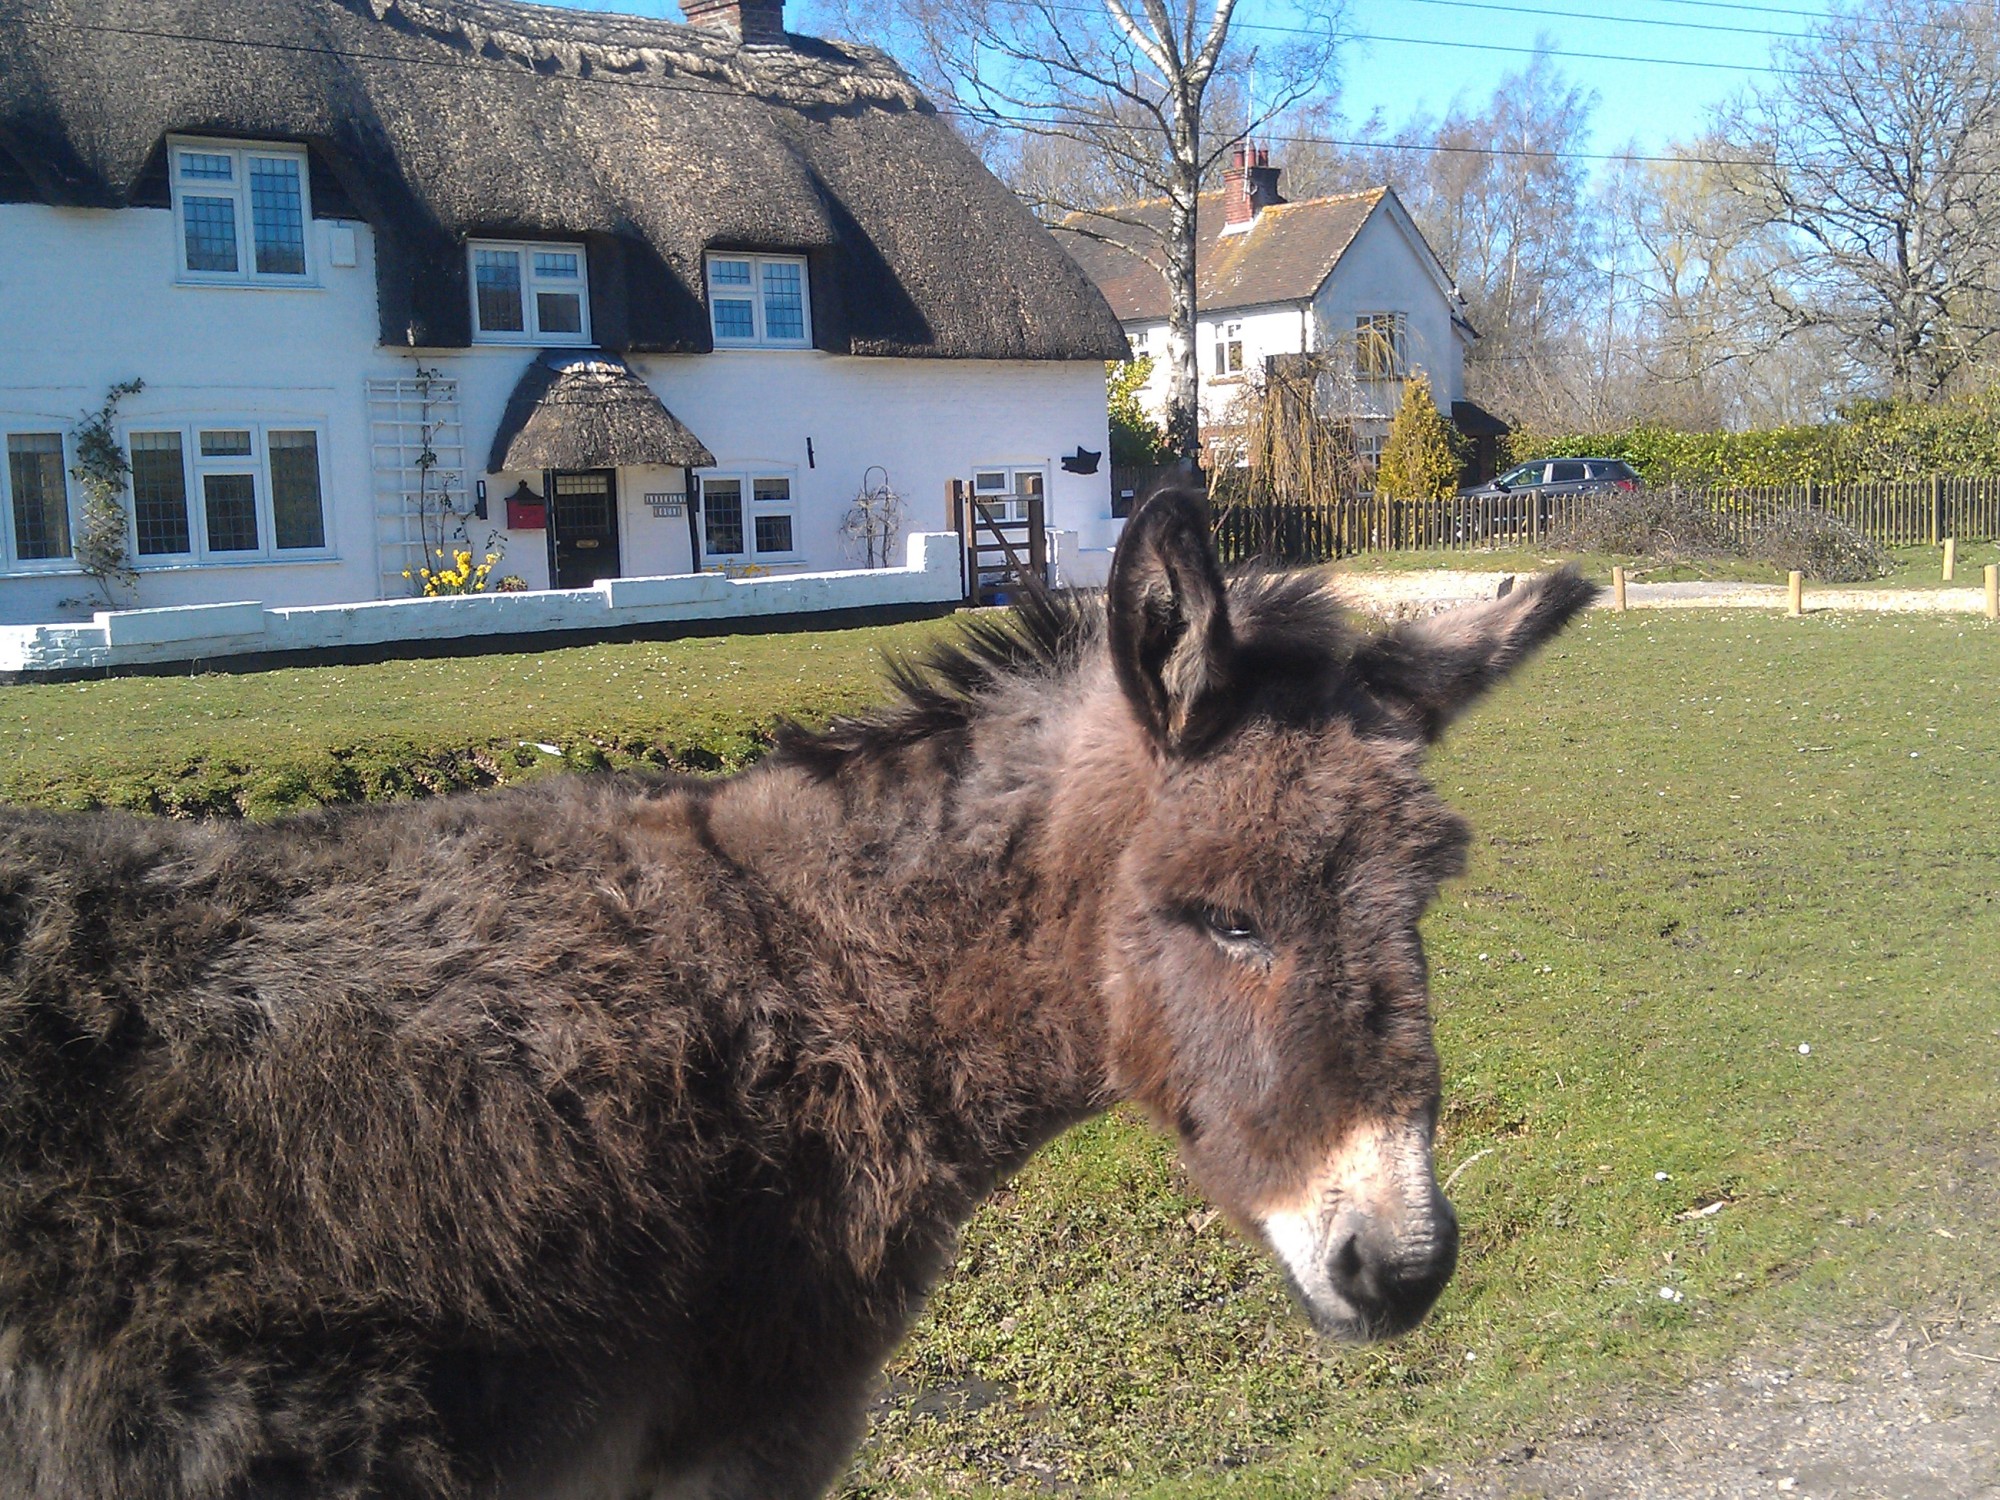 Thatched cottage with white walls in the background, In the foreground a donkey standing on grass is turning towards the camera. Blue sky and a sunny day.